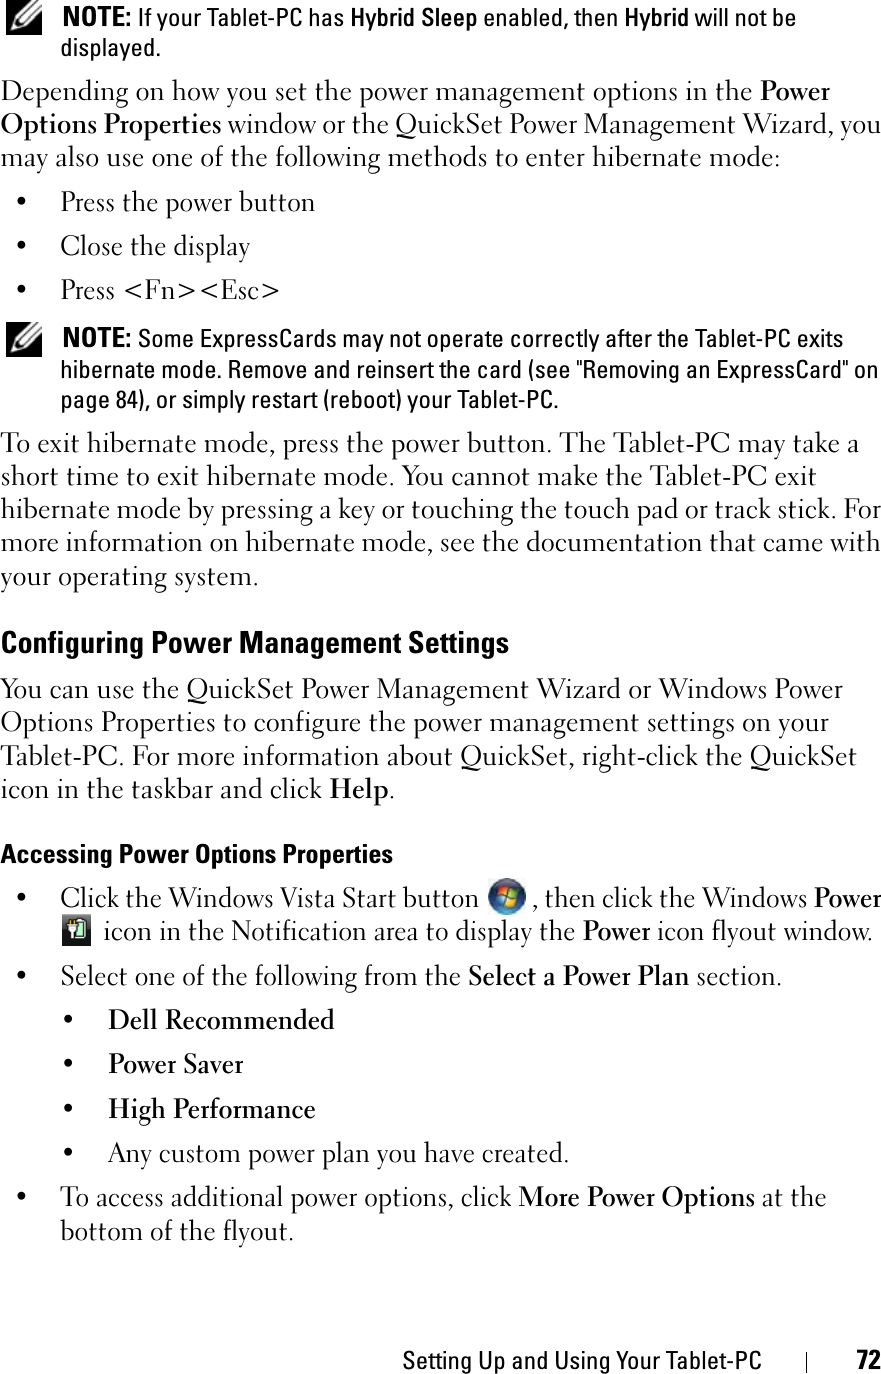 Setting Up and Using Your Tablet-PC 72NOTE: If your Tablet-PC has Hybrid Sleep enabled, then Hybrid will not be displayed.Depending on how you set the power management options in the Power Options Properties window or the QuickSet Power Management Wizard, you may also use one of the following methods to enter hibernate mode:• Press the power button• Close the display• Press &lt;Fn&gt;&lt;Esc&gt;NOTE: Some ExpressCards may not operate correctly after the Tablet-PC exits hibernate mode. Remove and reinsert the card (see &quot;Removing an ExpressCard&quot; on page 84), or simply restart (reboot) your Tablet-PC.To exit hibernate mode, press the power button. The Tablet-PC may take a short time to exit hibernate mode. You cannot make the Tablet-PC exit hibernate mode by pressing a key or touching the touch pad or track stick. For more information on hibernate mode, see the documentation that came with your operating system.Configuring Power Management SettingsYou can use the QuickSet Power Management Wizard or Windows Power Options Properties to configure the power management settings on your Tablet-PC. For more information about QuickSet, right-click the QuickSet icon in the taskbar and click Help.Accessing Power Options Properties• Click the Windows Vista Start button  , then click the Windows Power icon in the Notification area to display the Power icon flyout window. • Select one of the following from the Select a Power Plan section.• Dell Recommended• Power Saver• High Performance• Any custom power plan you have created.• To access additional power options, click More Power Options at the bottom of the flyout.